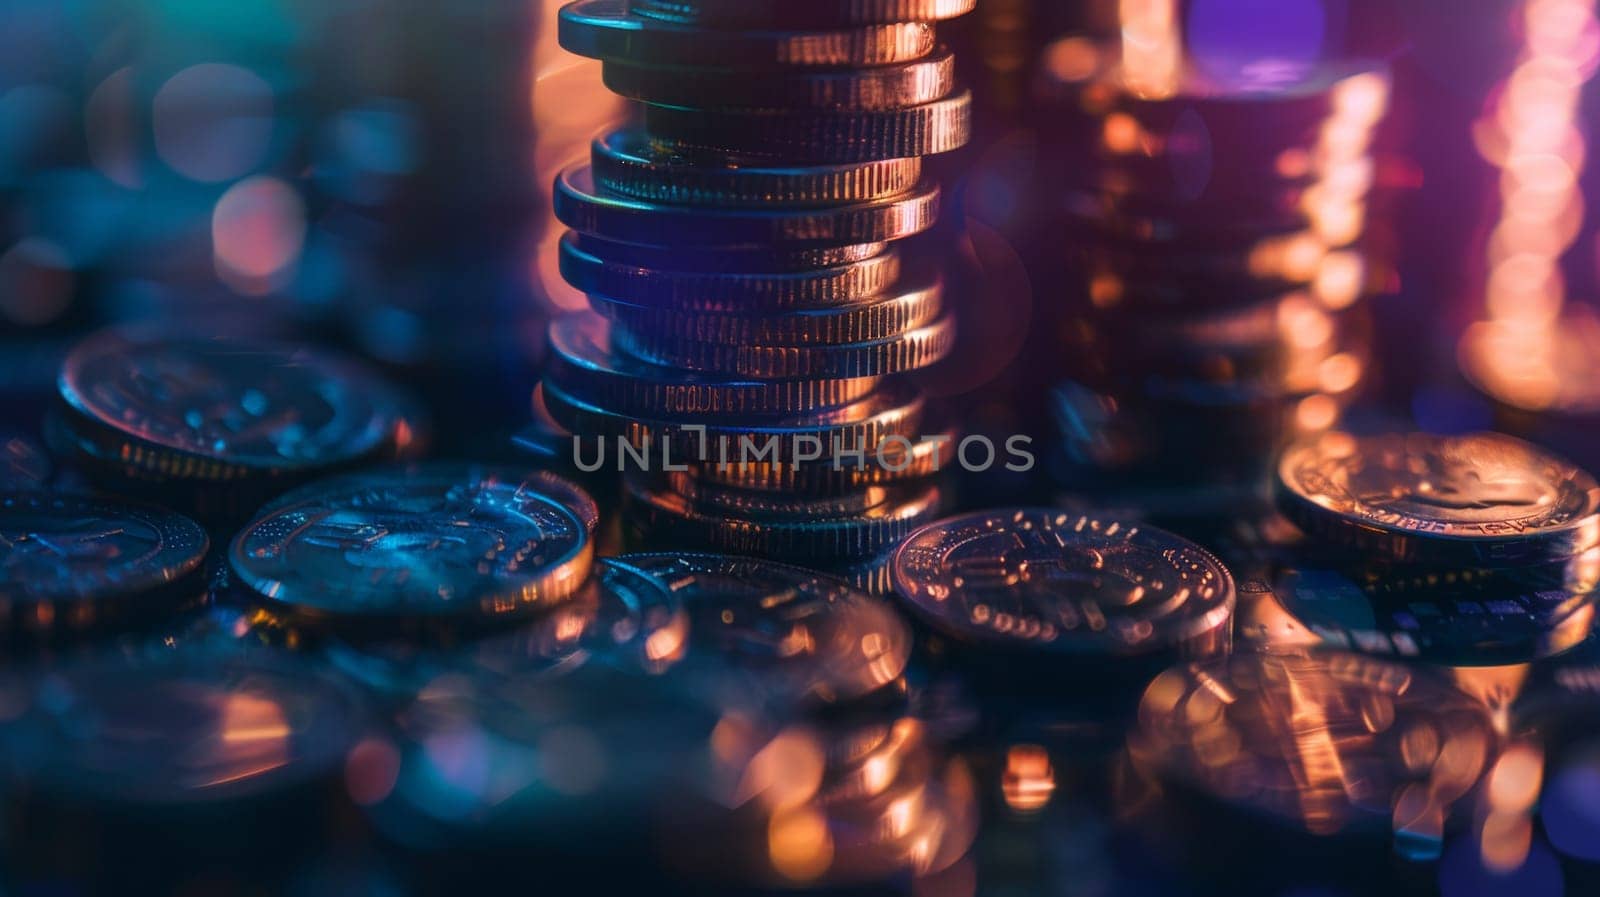 A pile of coins with a blurry background. The coins are stacked on top of each other, creating a sense of depth and dimension. The image conveys a feeling of abundance and wealth